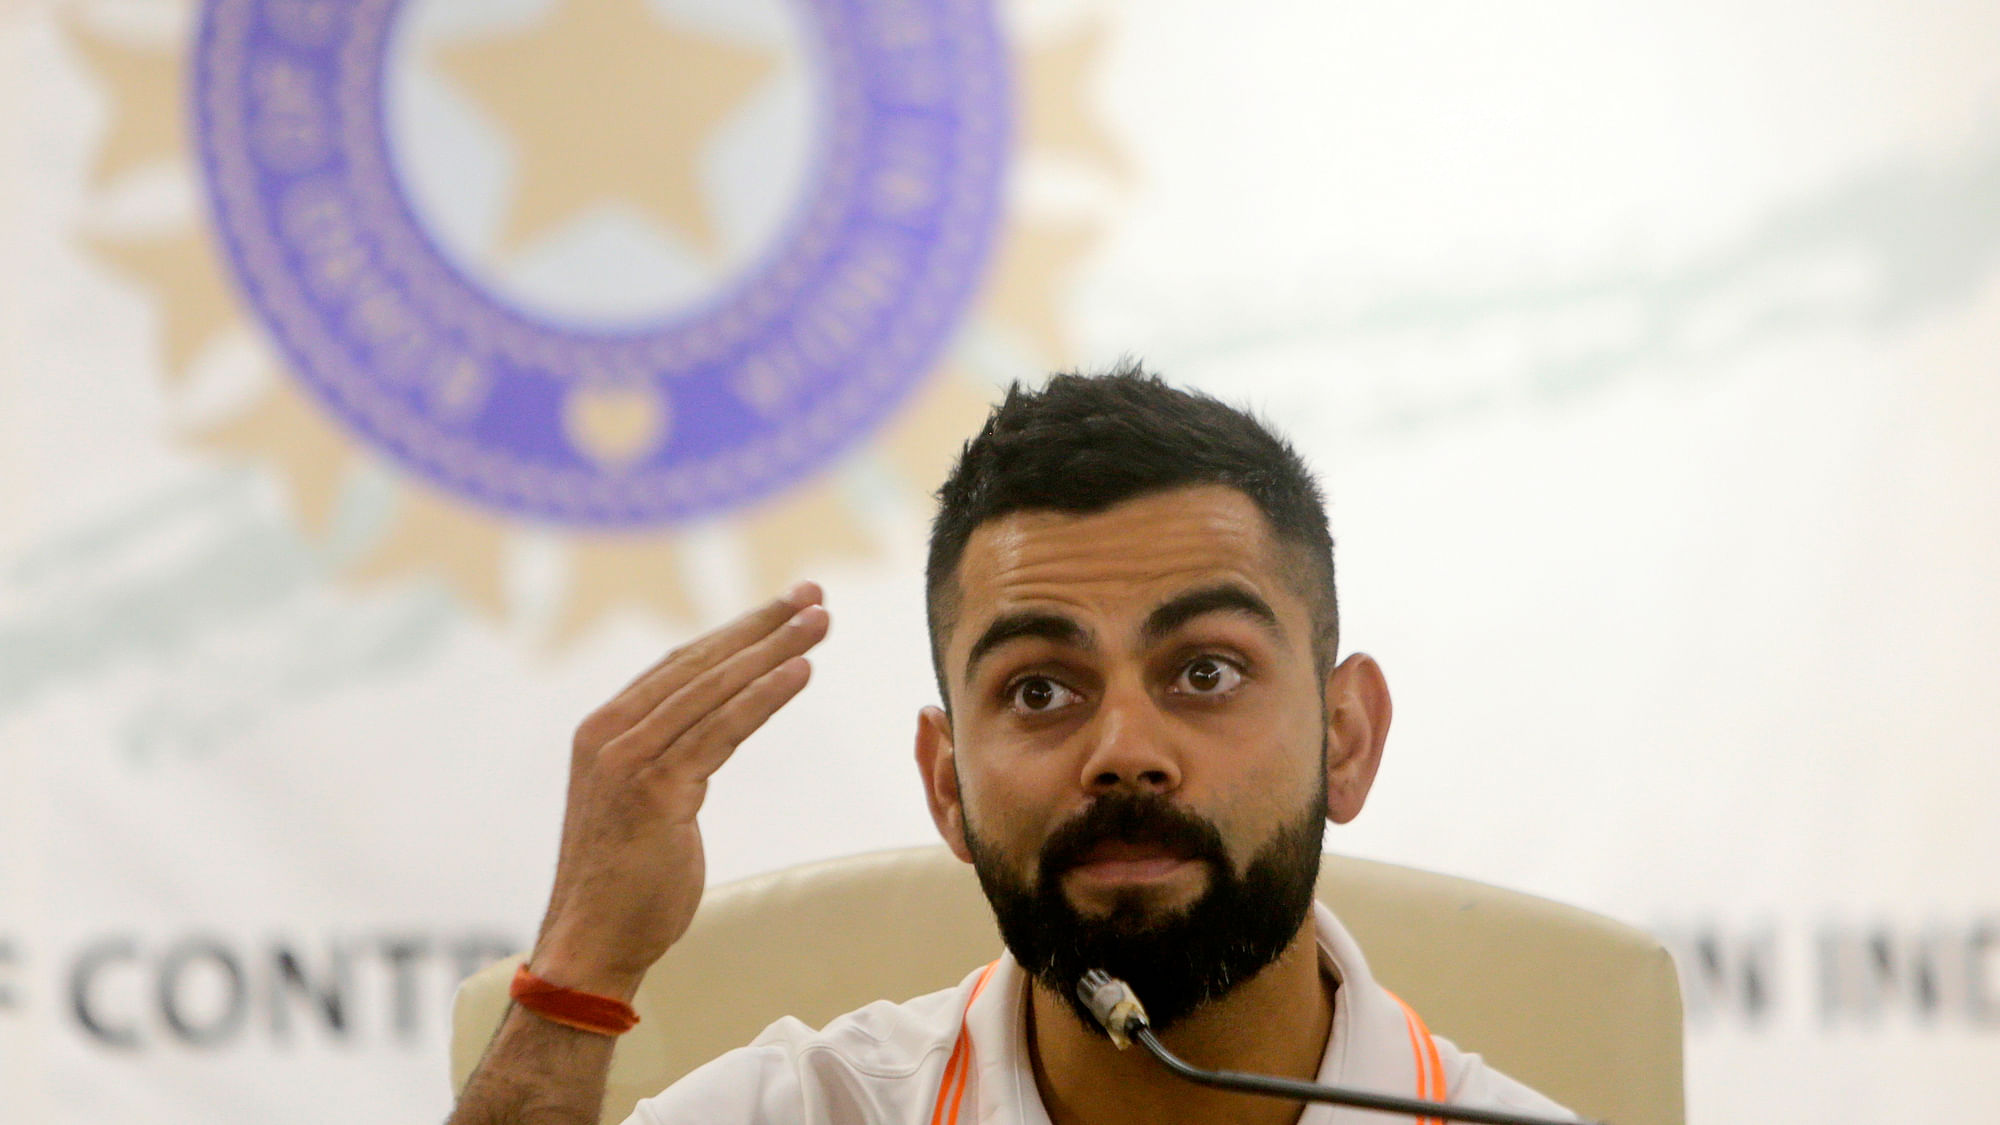 India captain Virat Kohli said his team has never been the one to start “anything” but will stand up for itself if the line is crossed by the opposition.